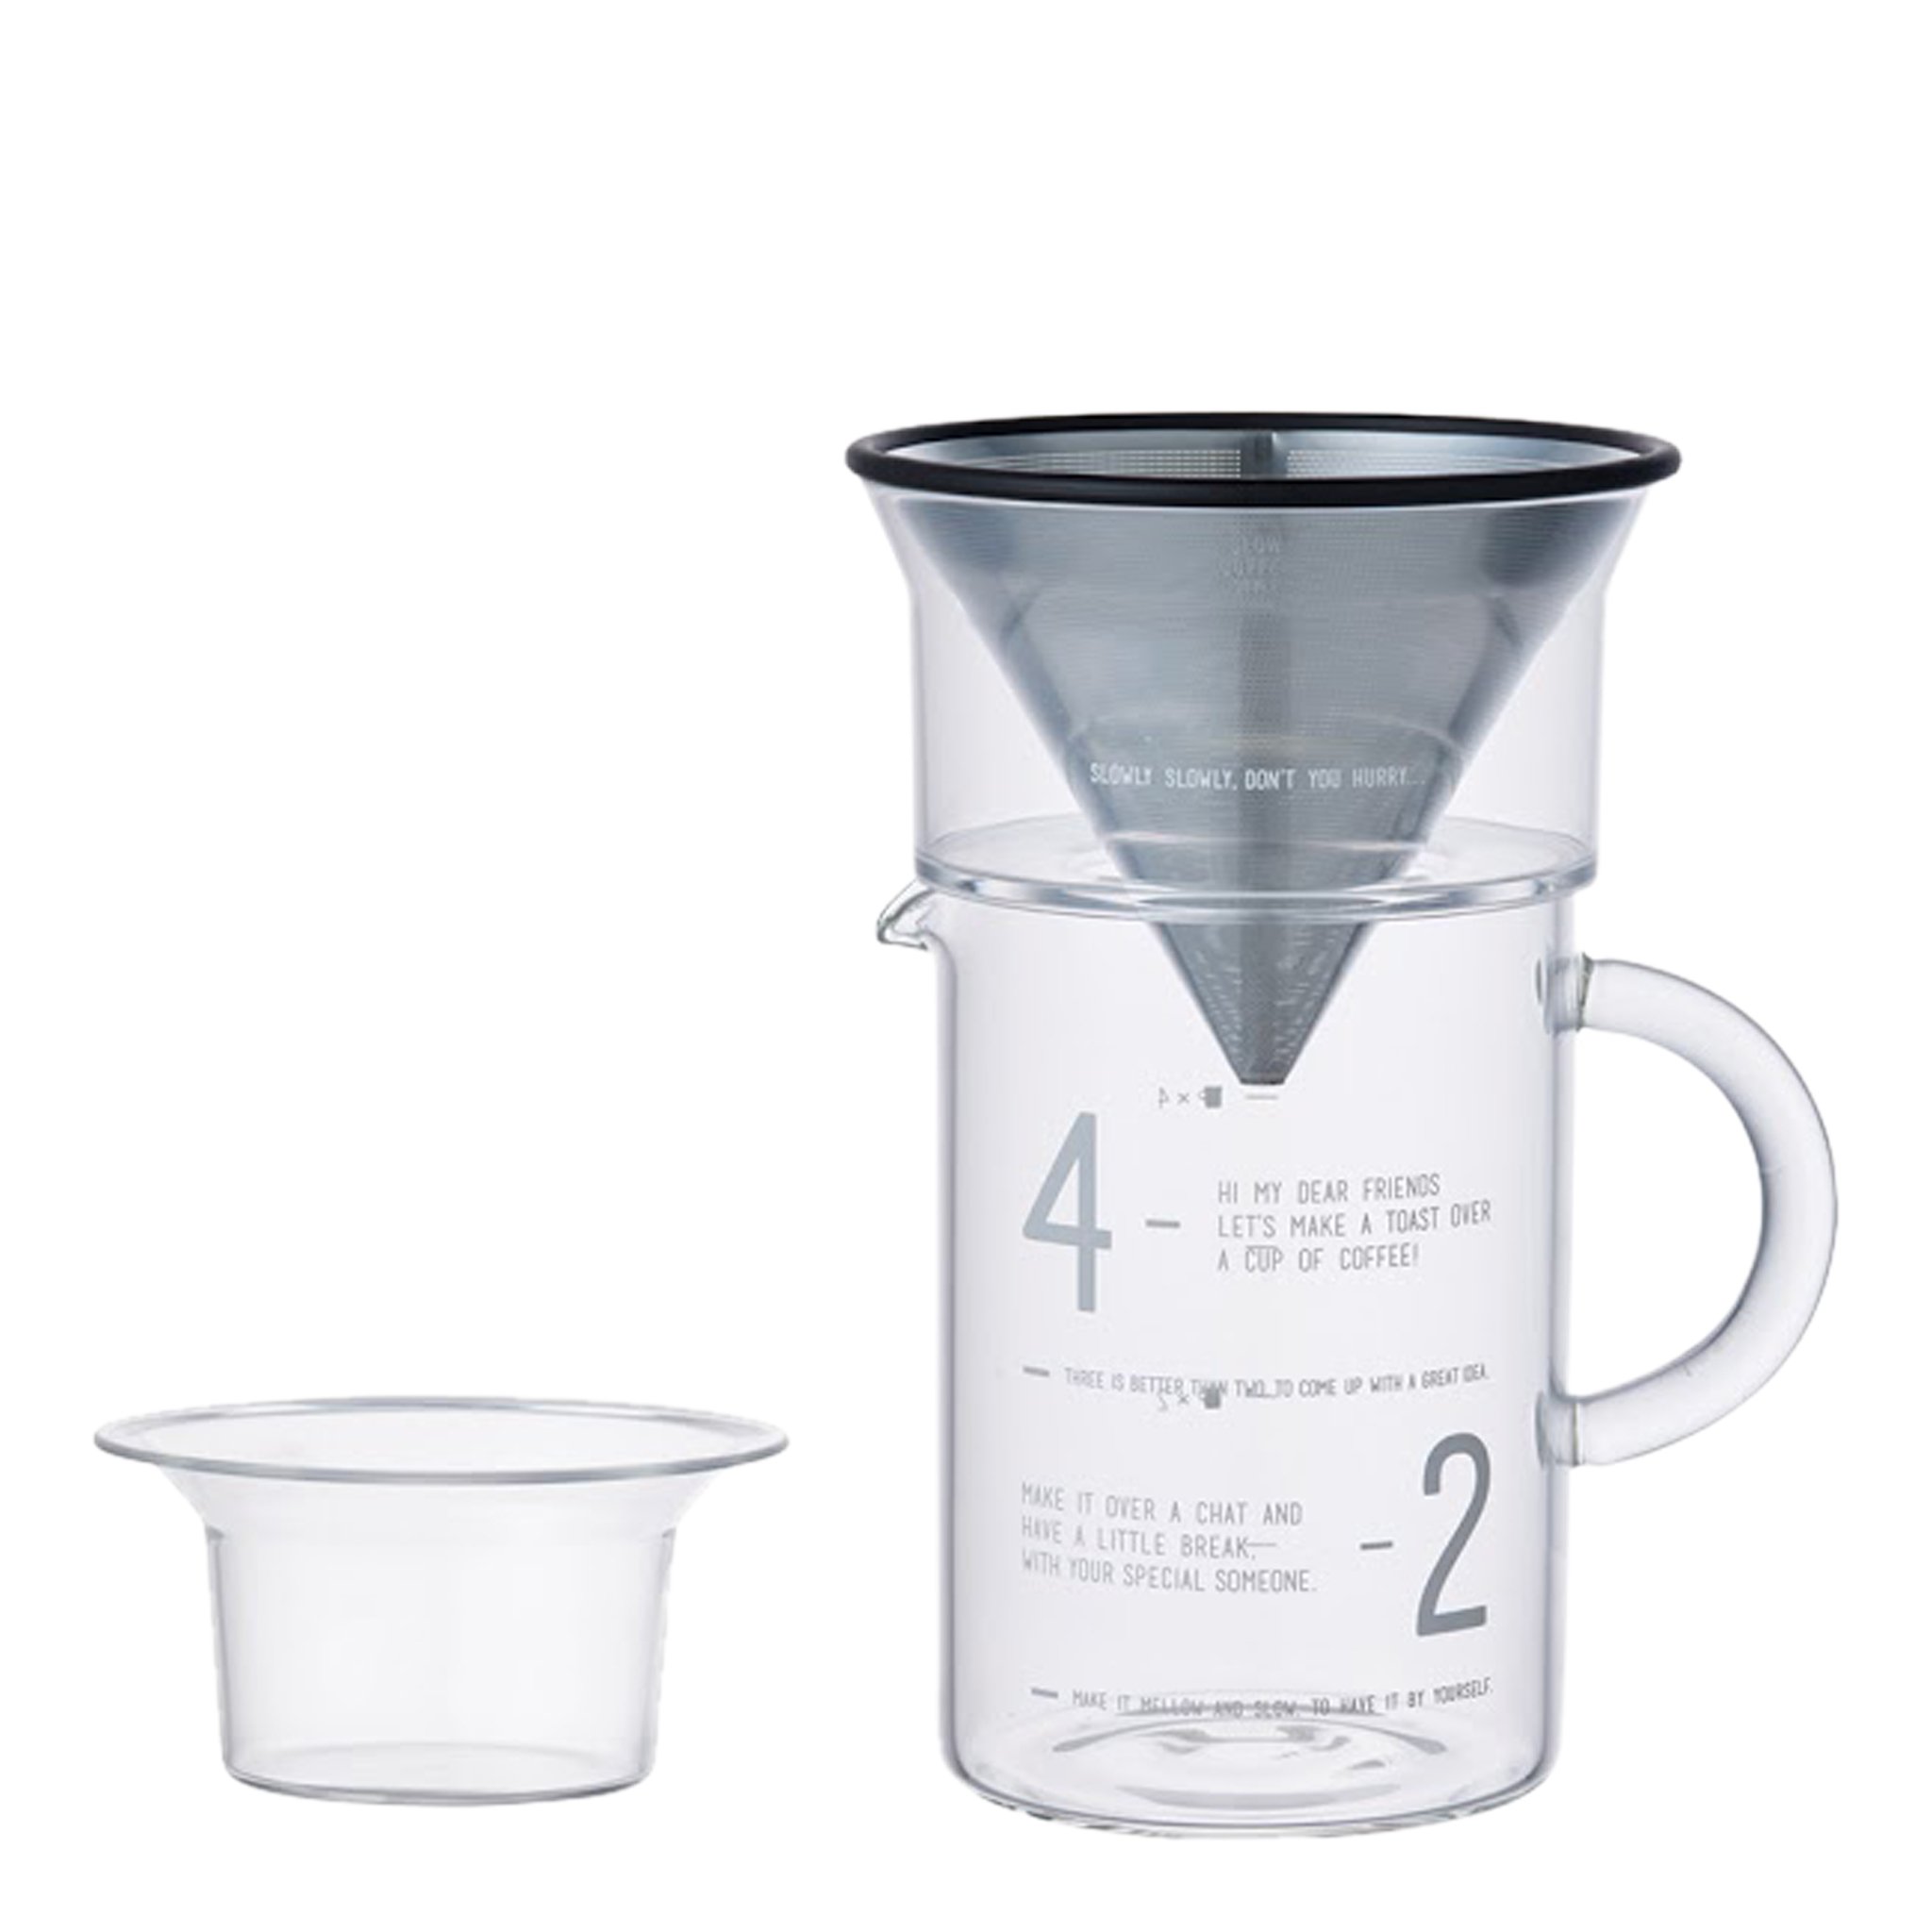 The plastic Kinto brewer is amazing, why is no-one talking about